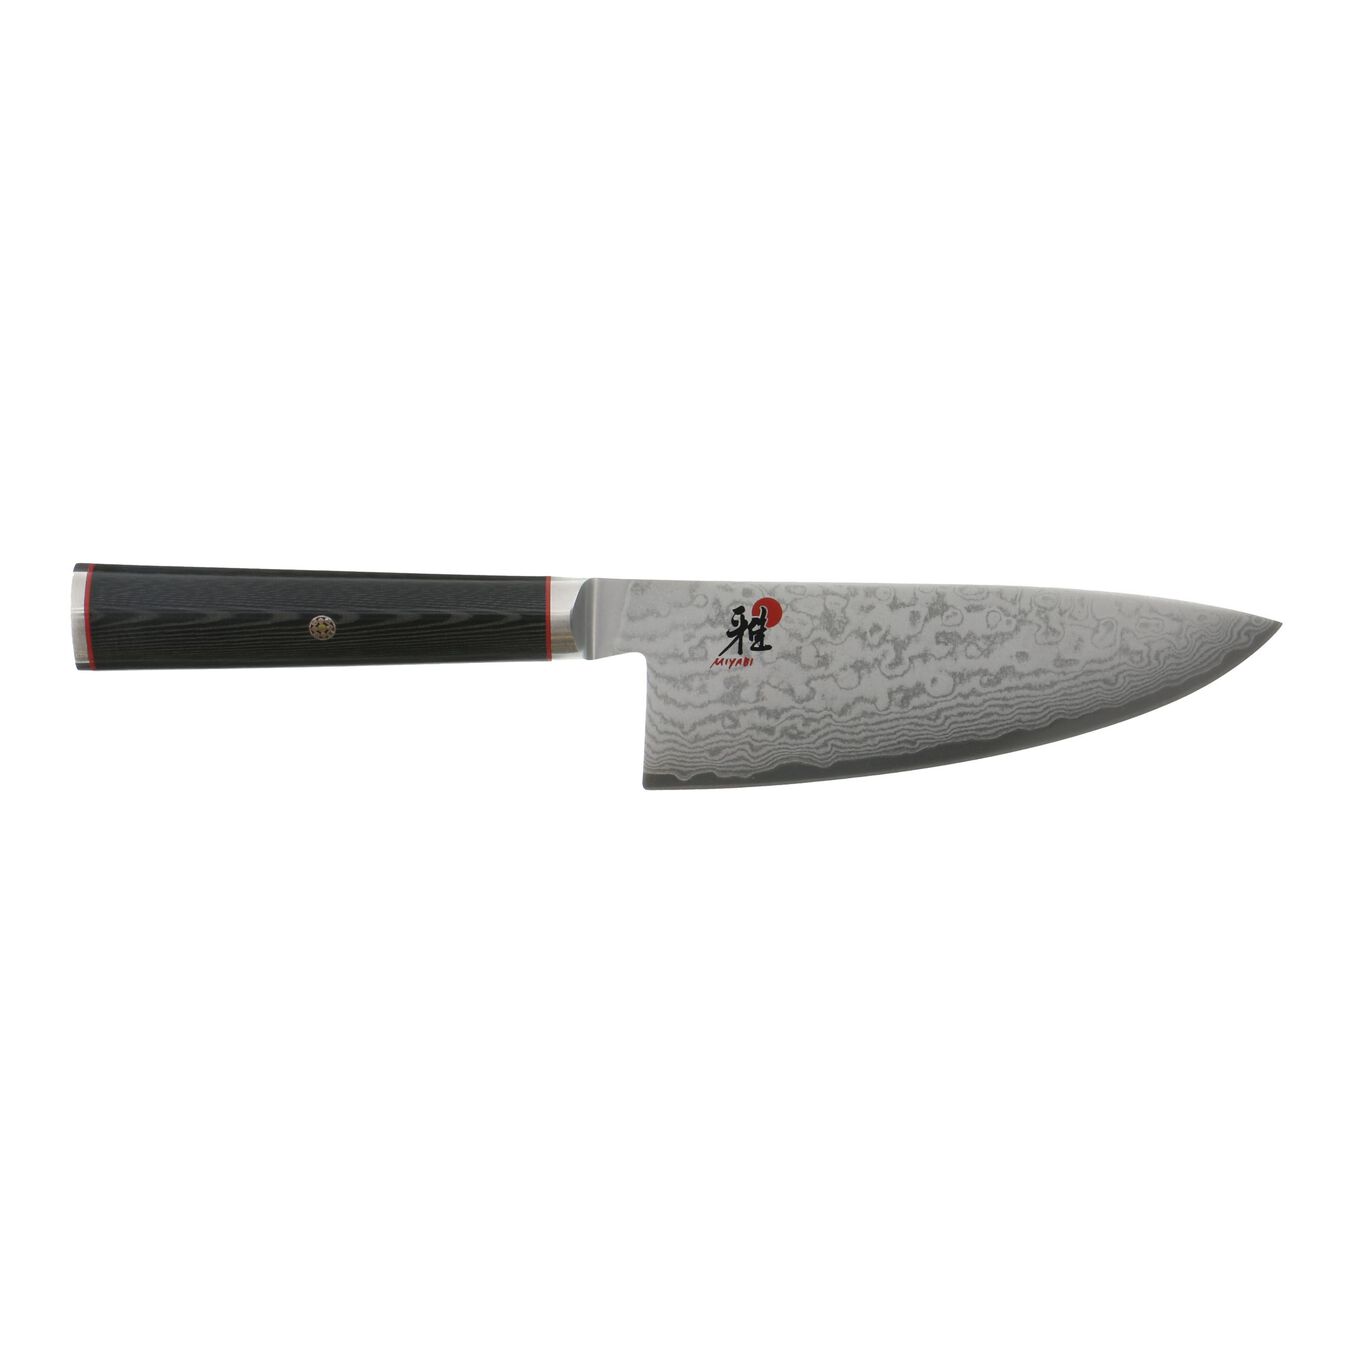 6-inch, Wide Chef's Knife,,large 1